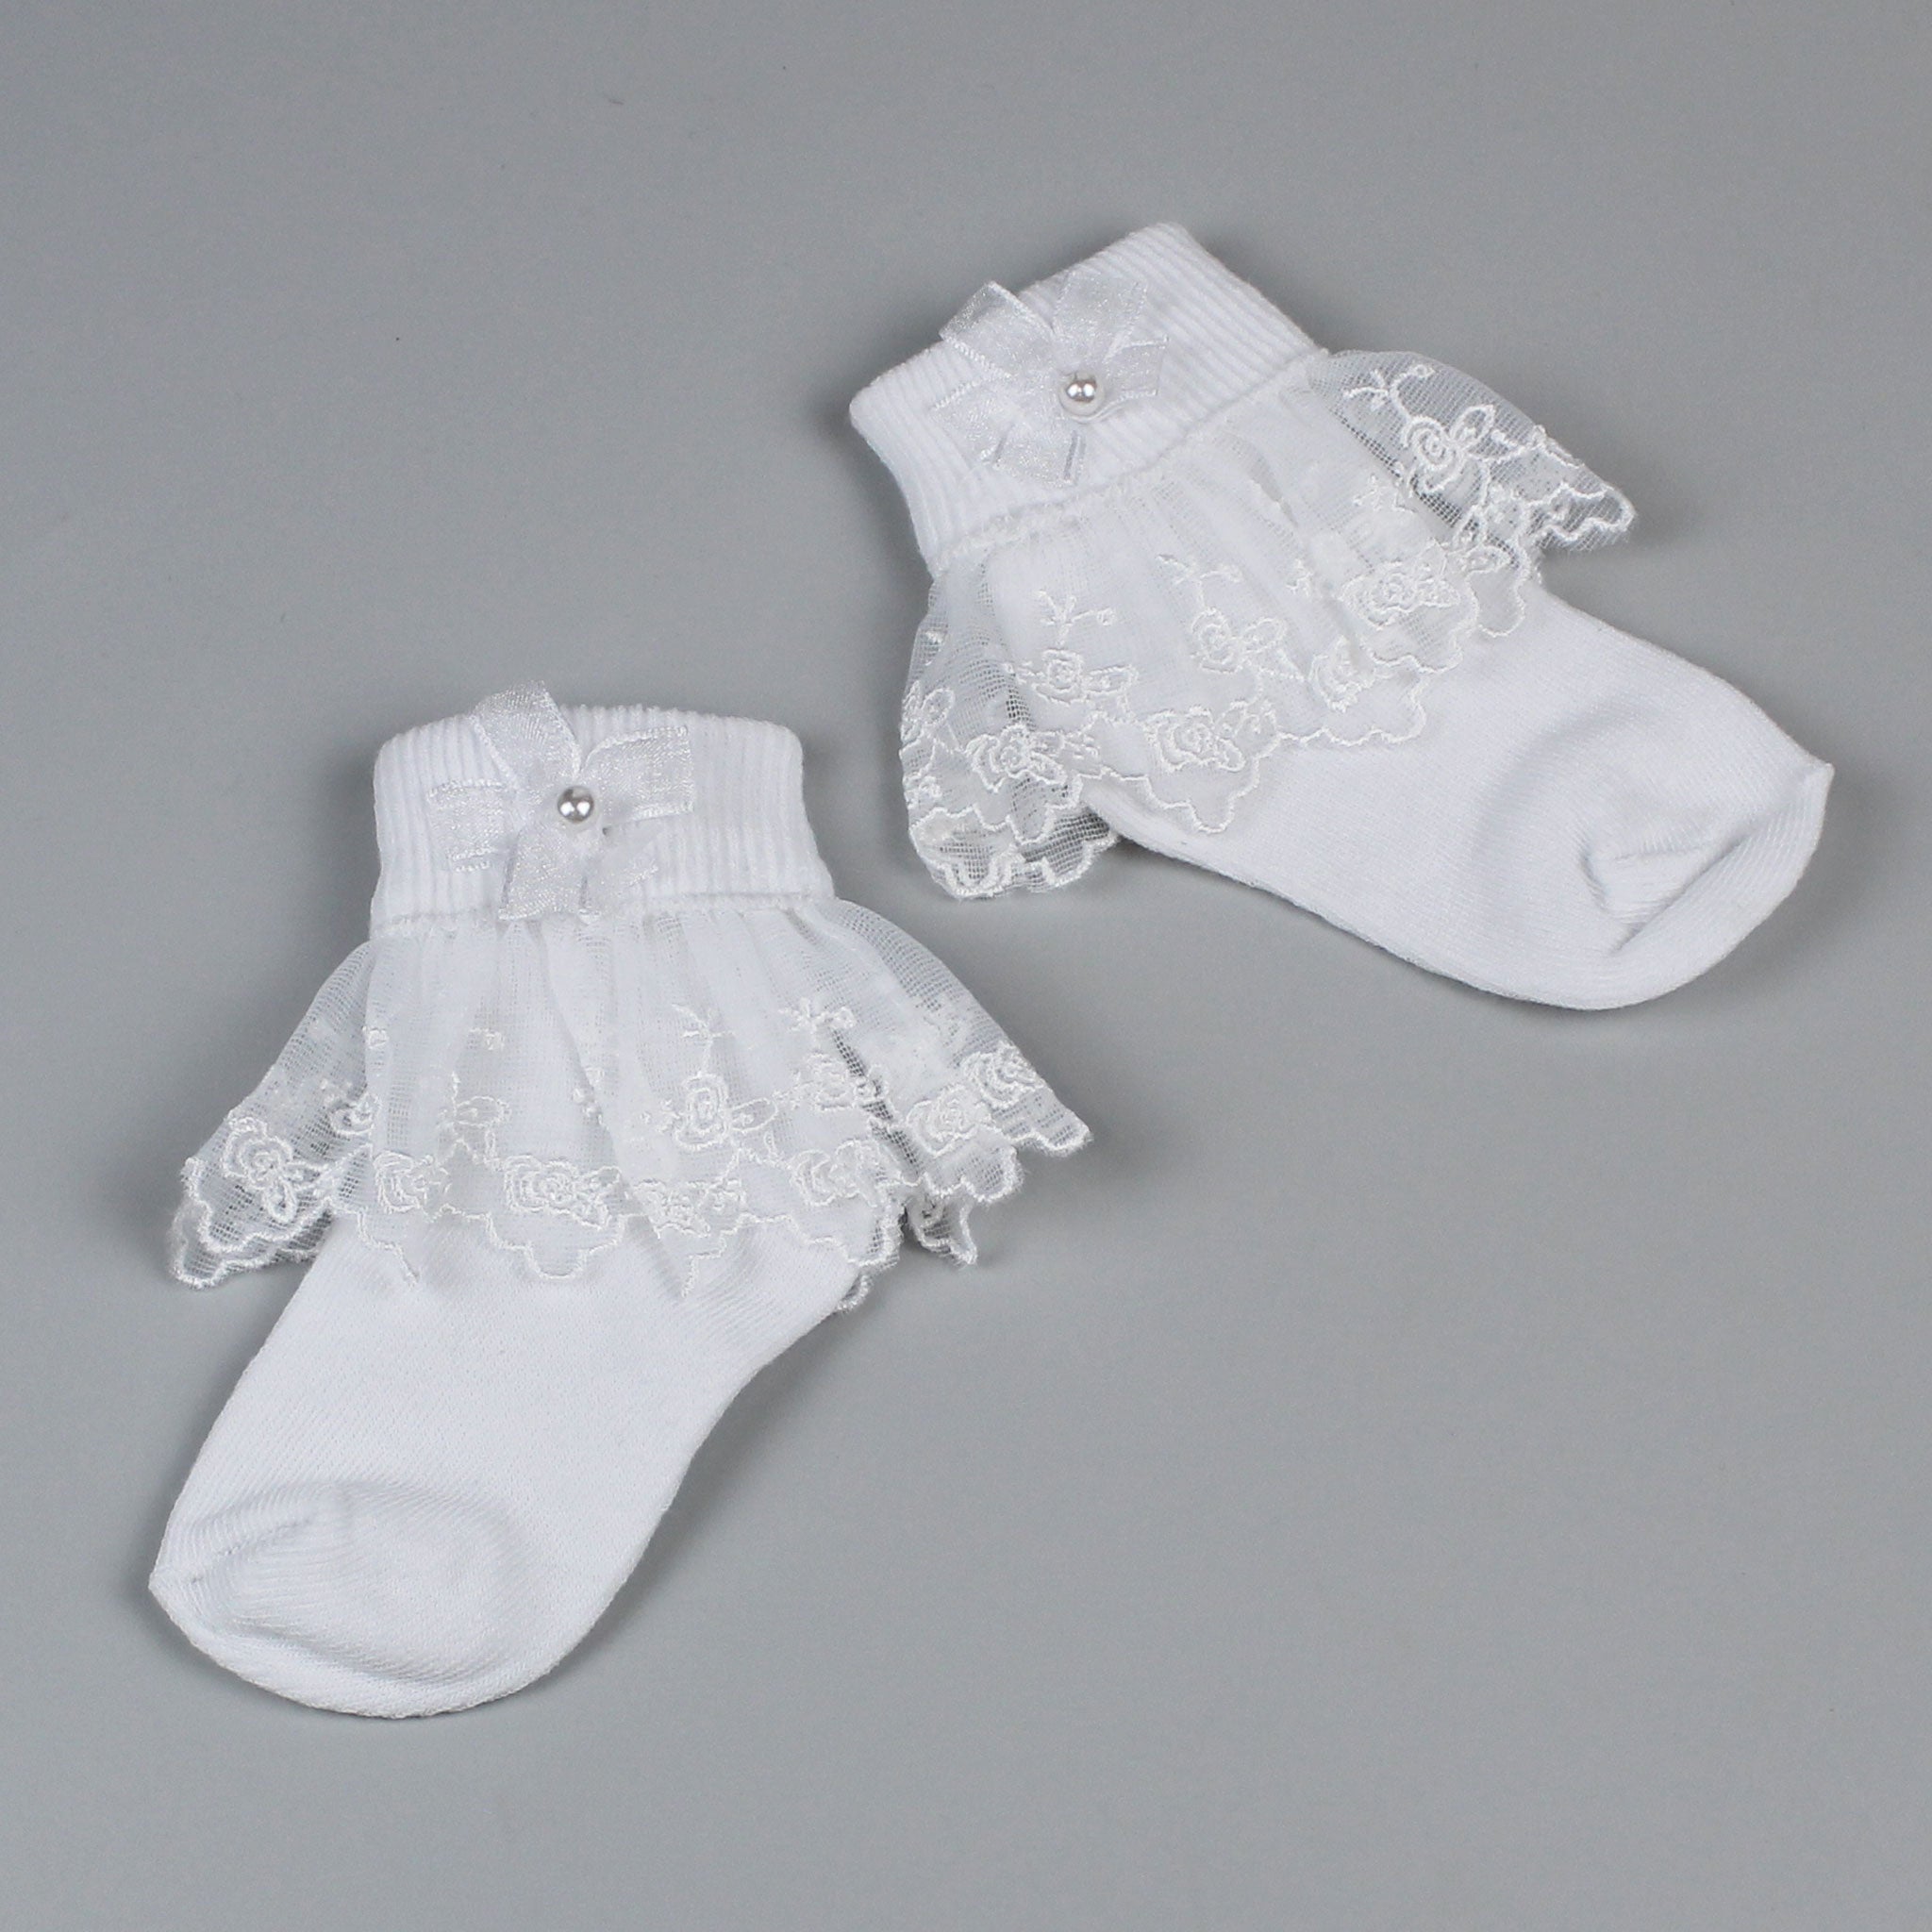 Baby Girl Lace Ankle Socks - White - Pex Snowdrop